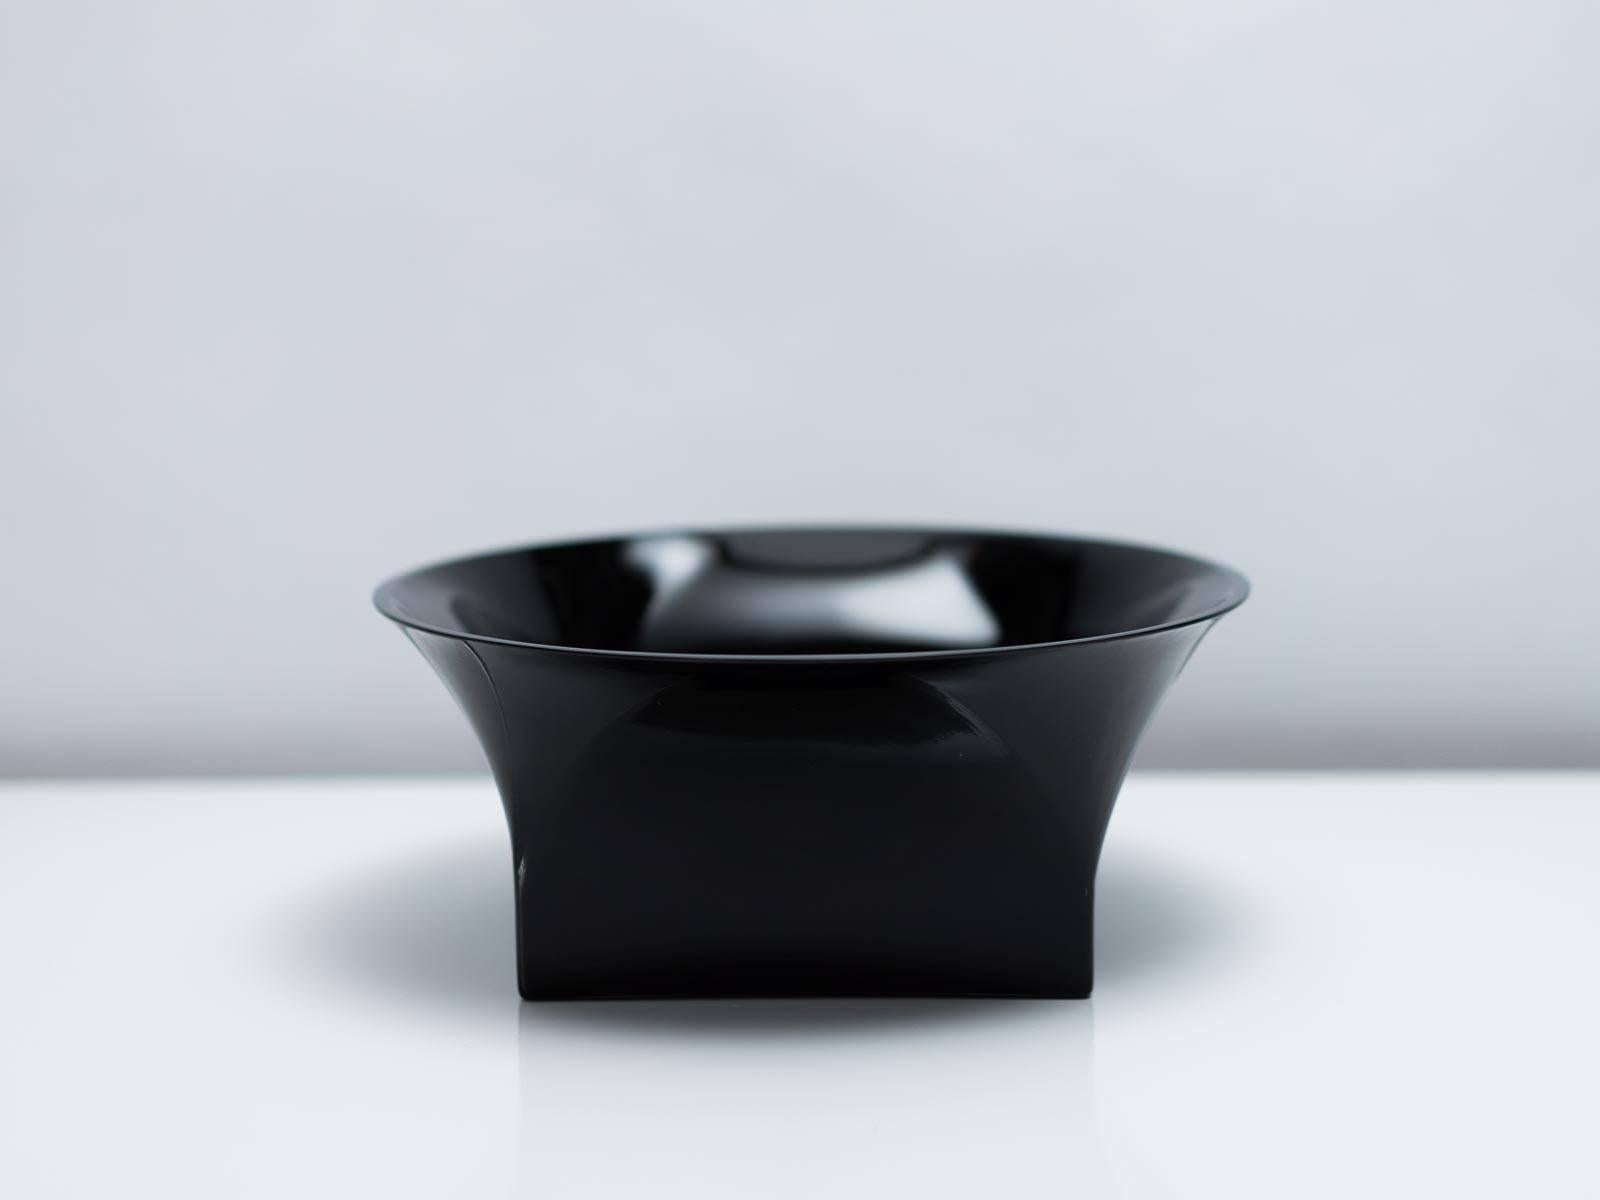 A large bowl designed by Sergio Asti and produced by Venini for Knoll International showrooms in 1972. The mould-blown glass shape was taken from Asti's earlier 'Démodé' designs for Venini. This deep black version exhibits the same artful